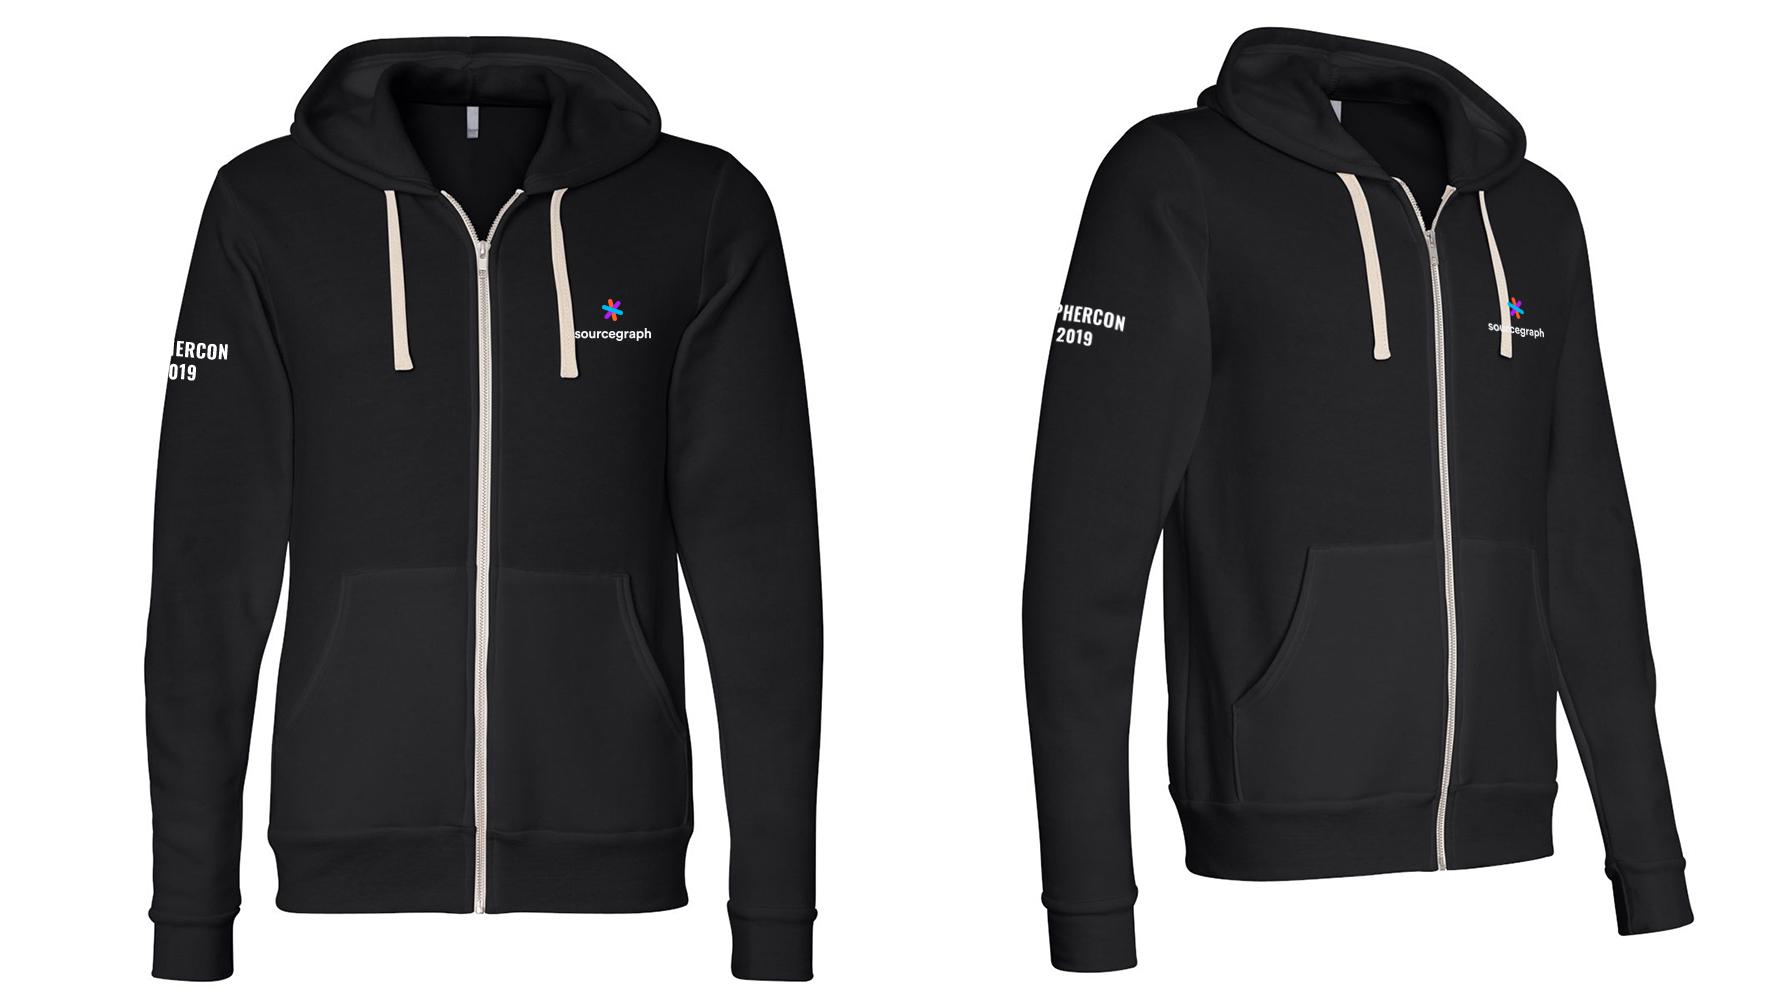 Sourcegraph GopherCon hoodie